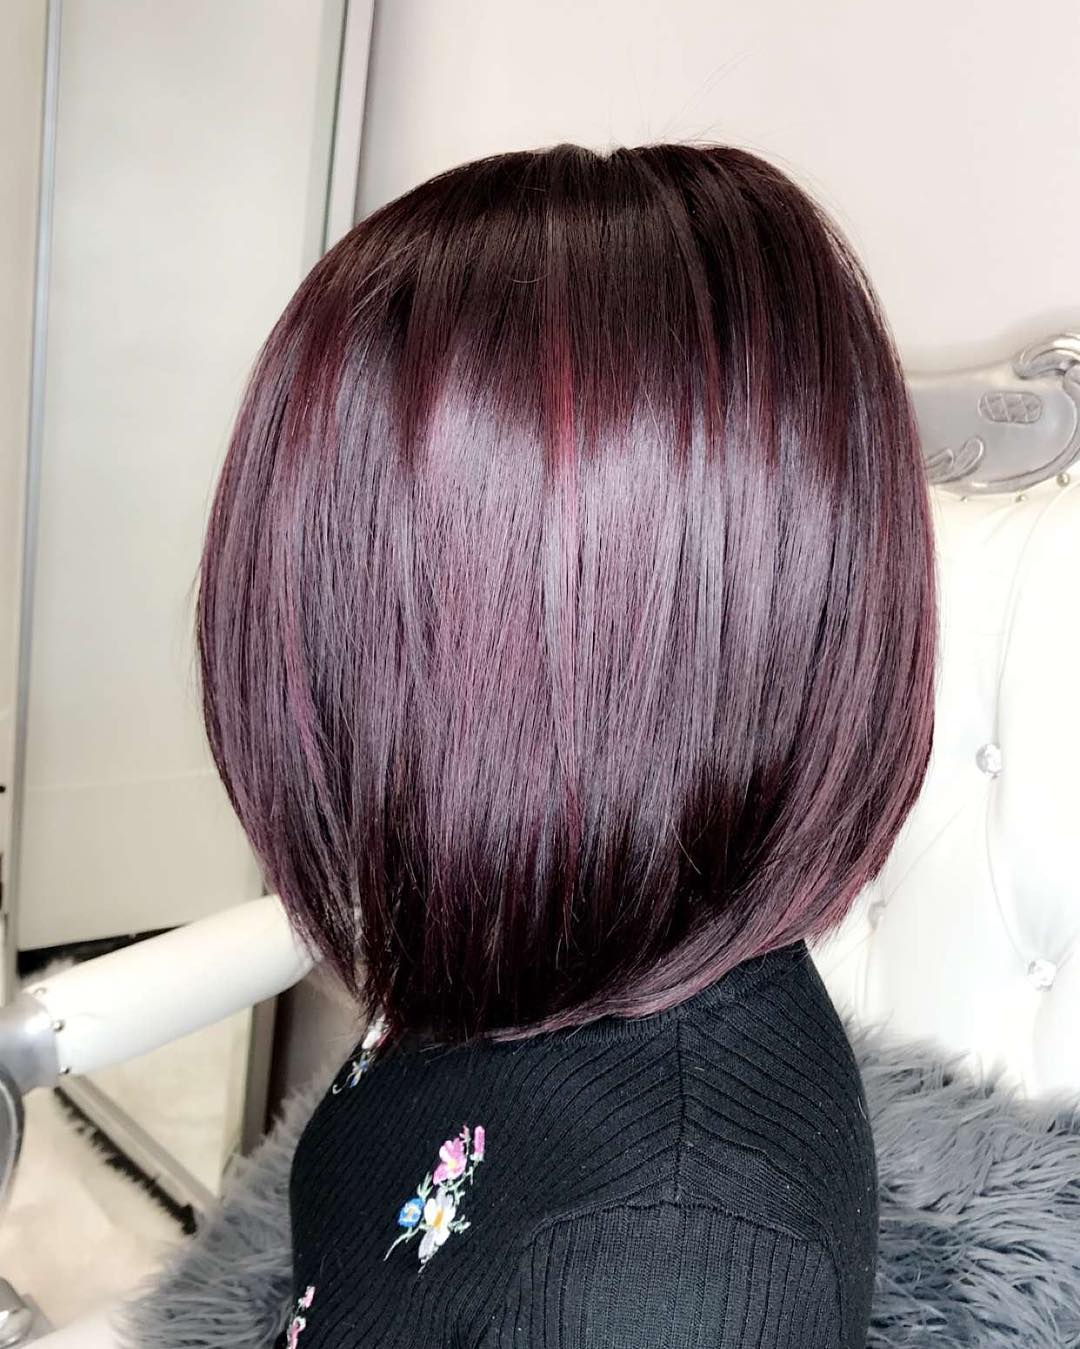 25+ Stunning Mahogany Hair Color - Highlights, Styles and Trends